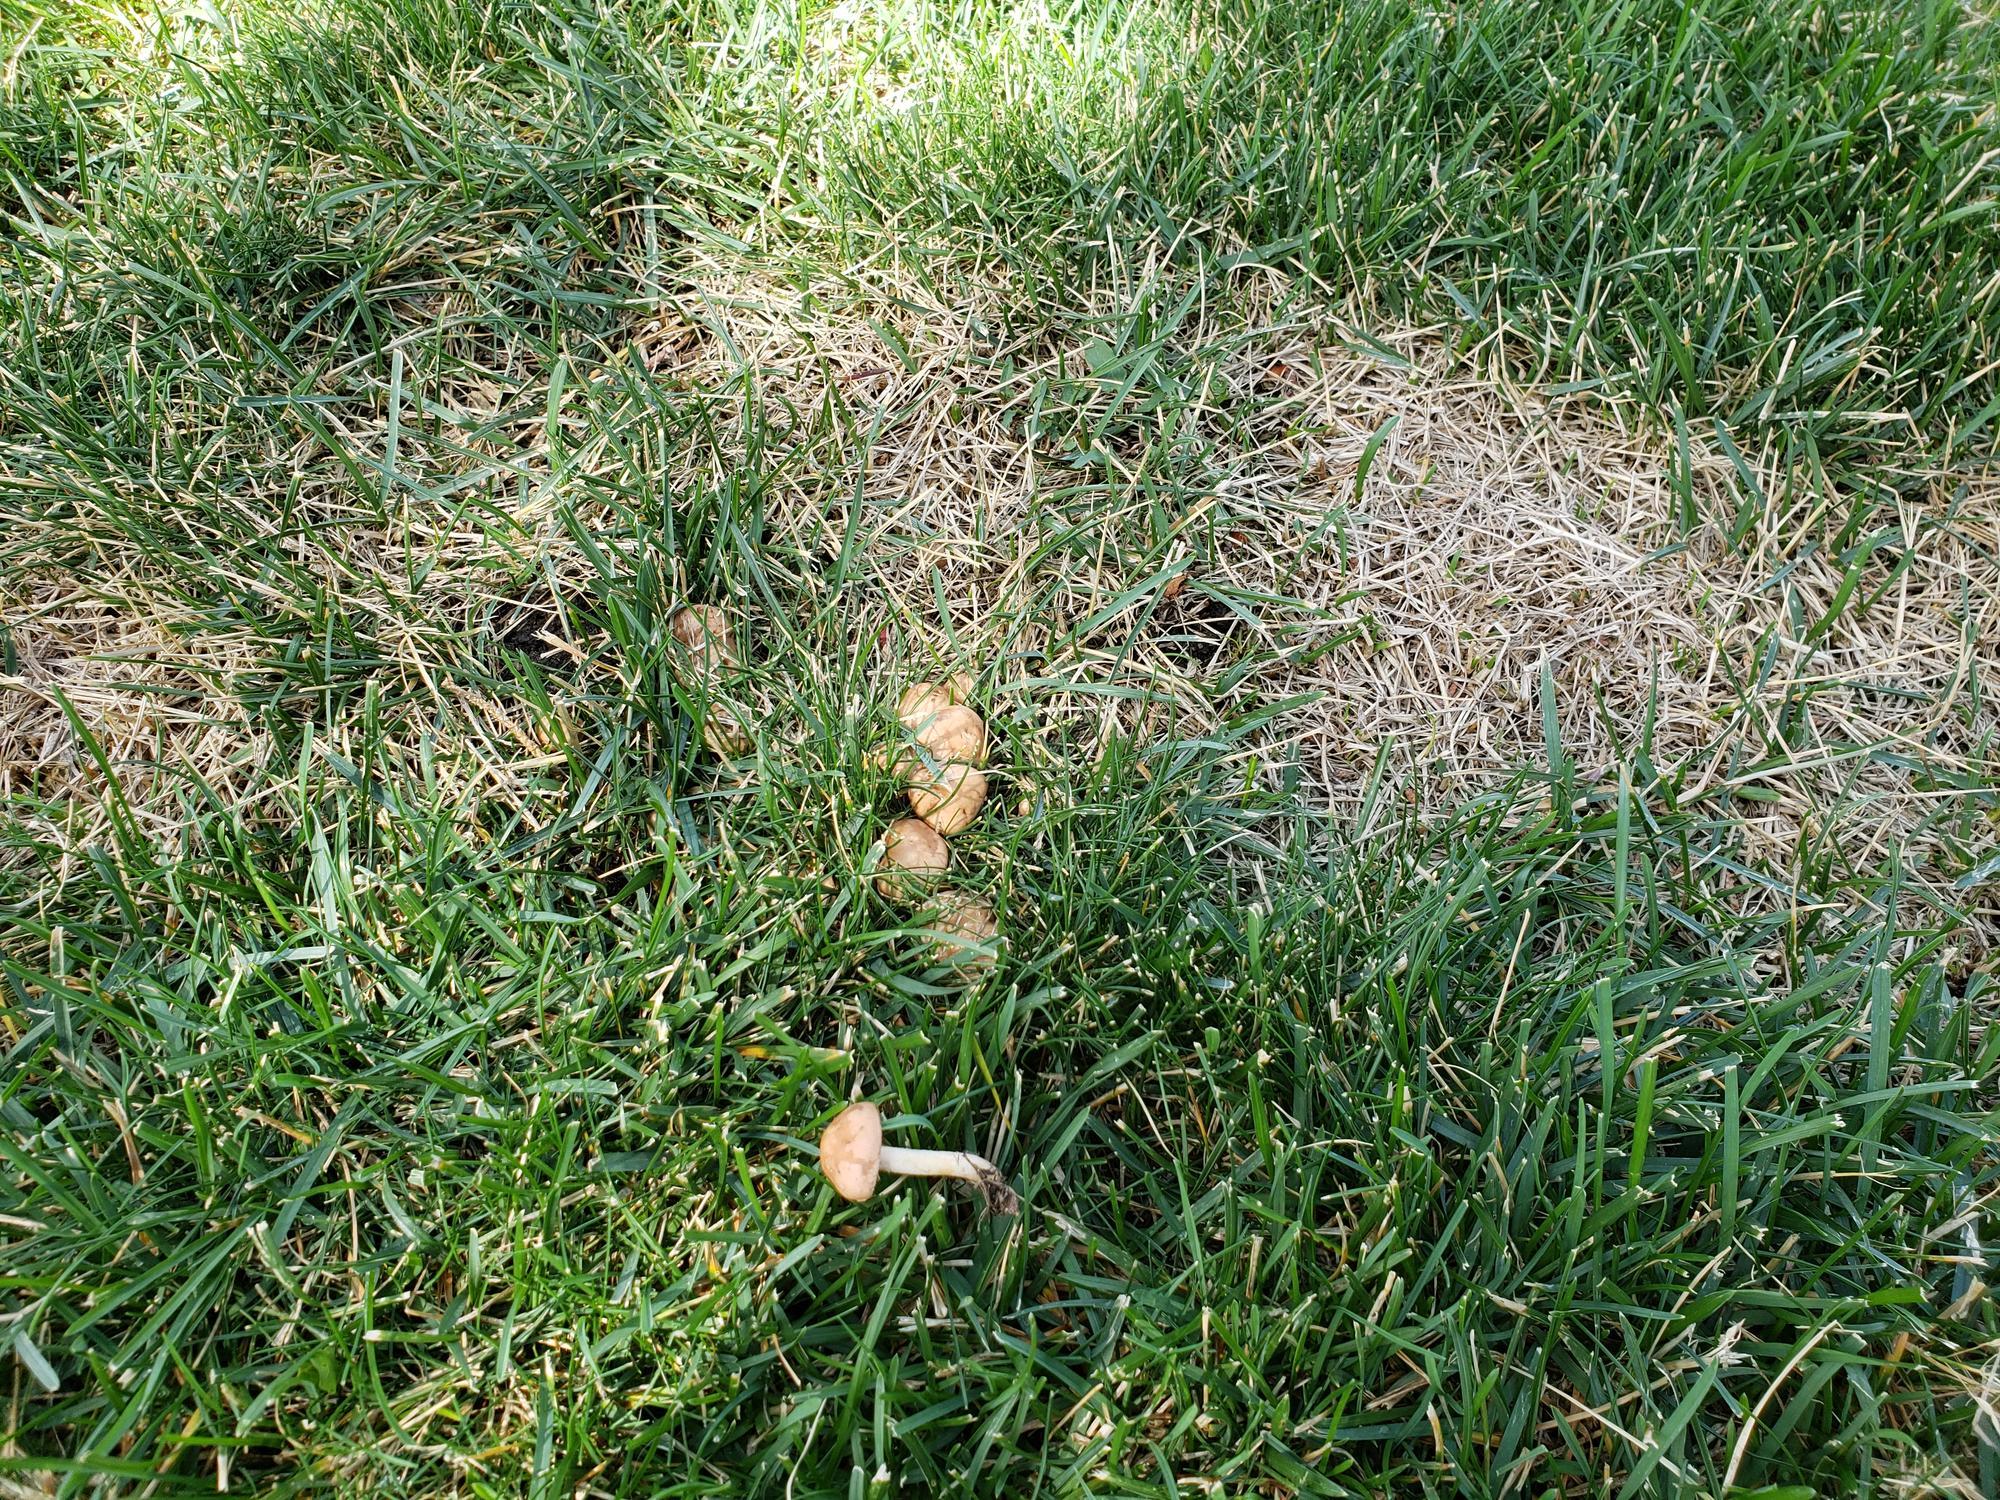 An image of a green lawn with a ring of dying grass and mushrooms growing in it.